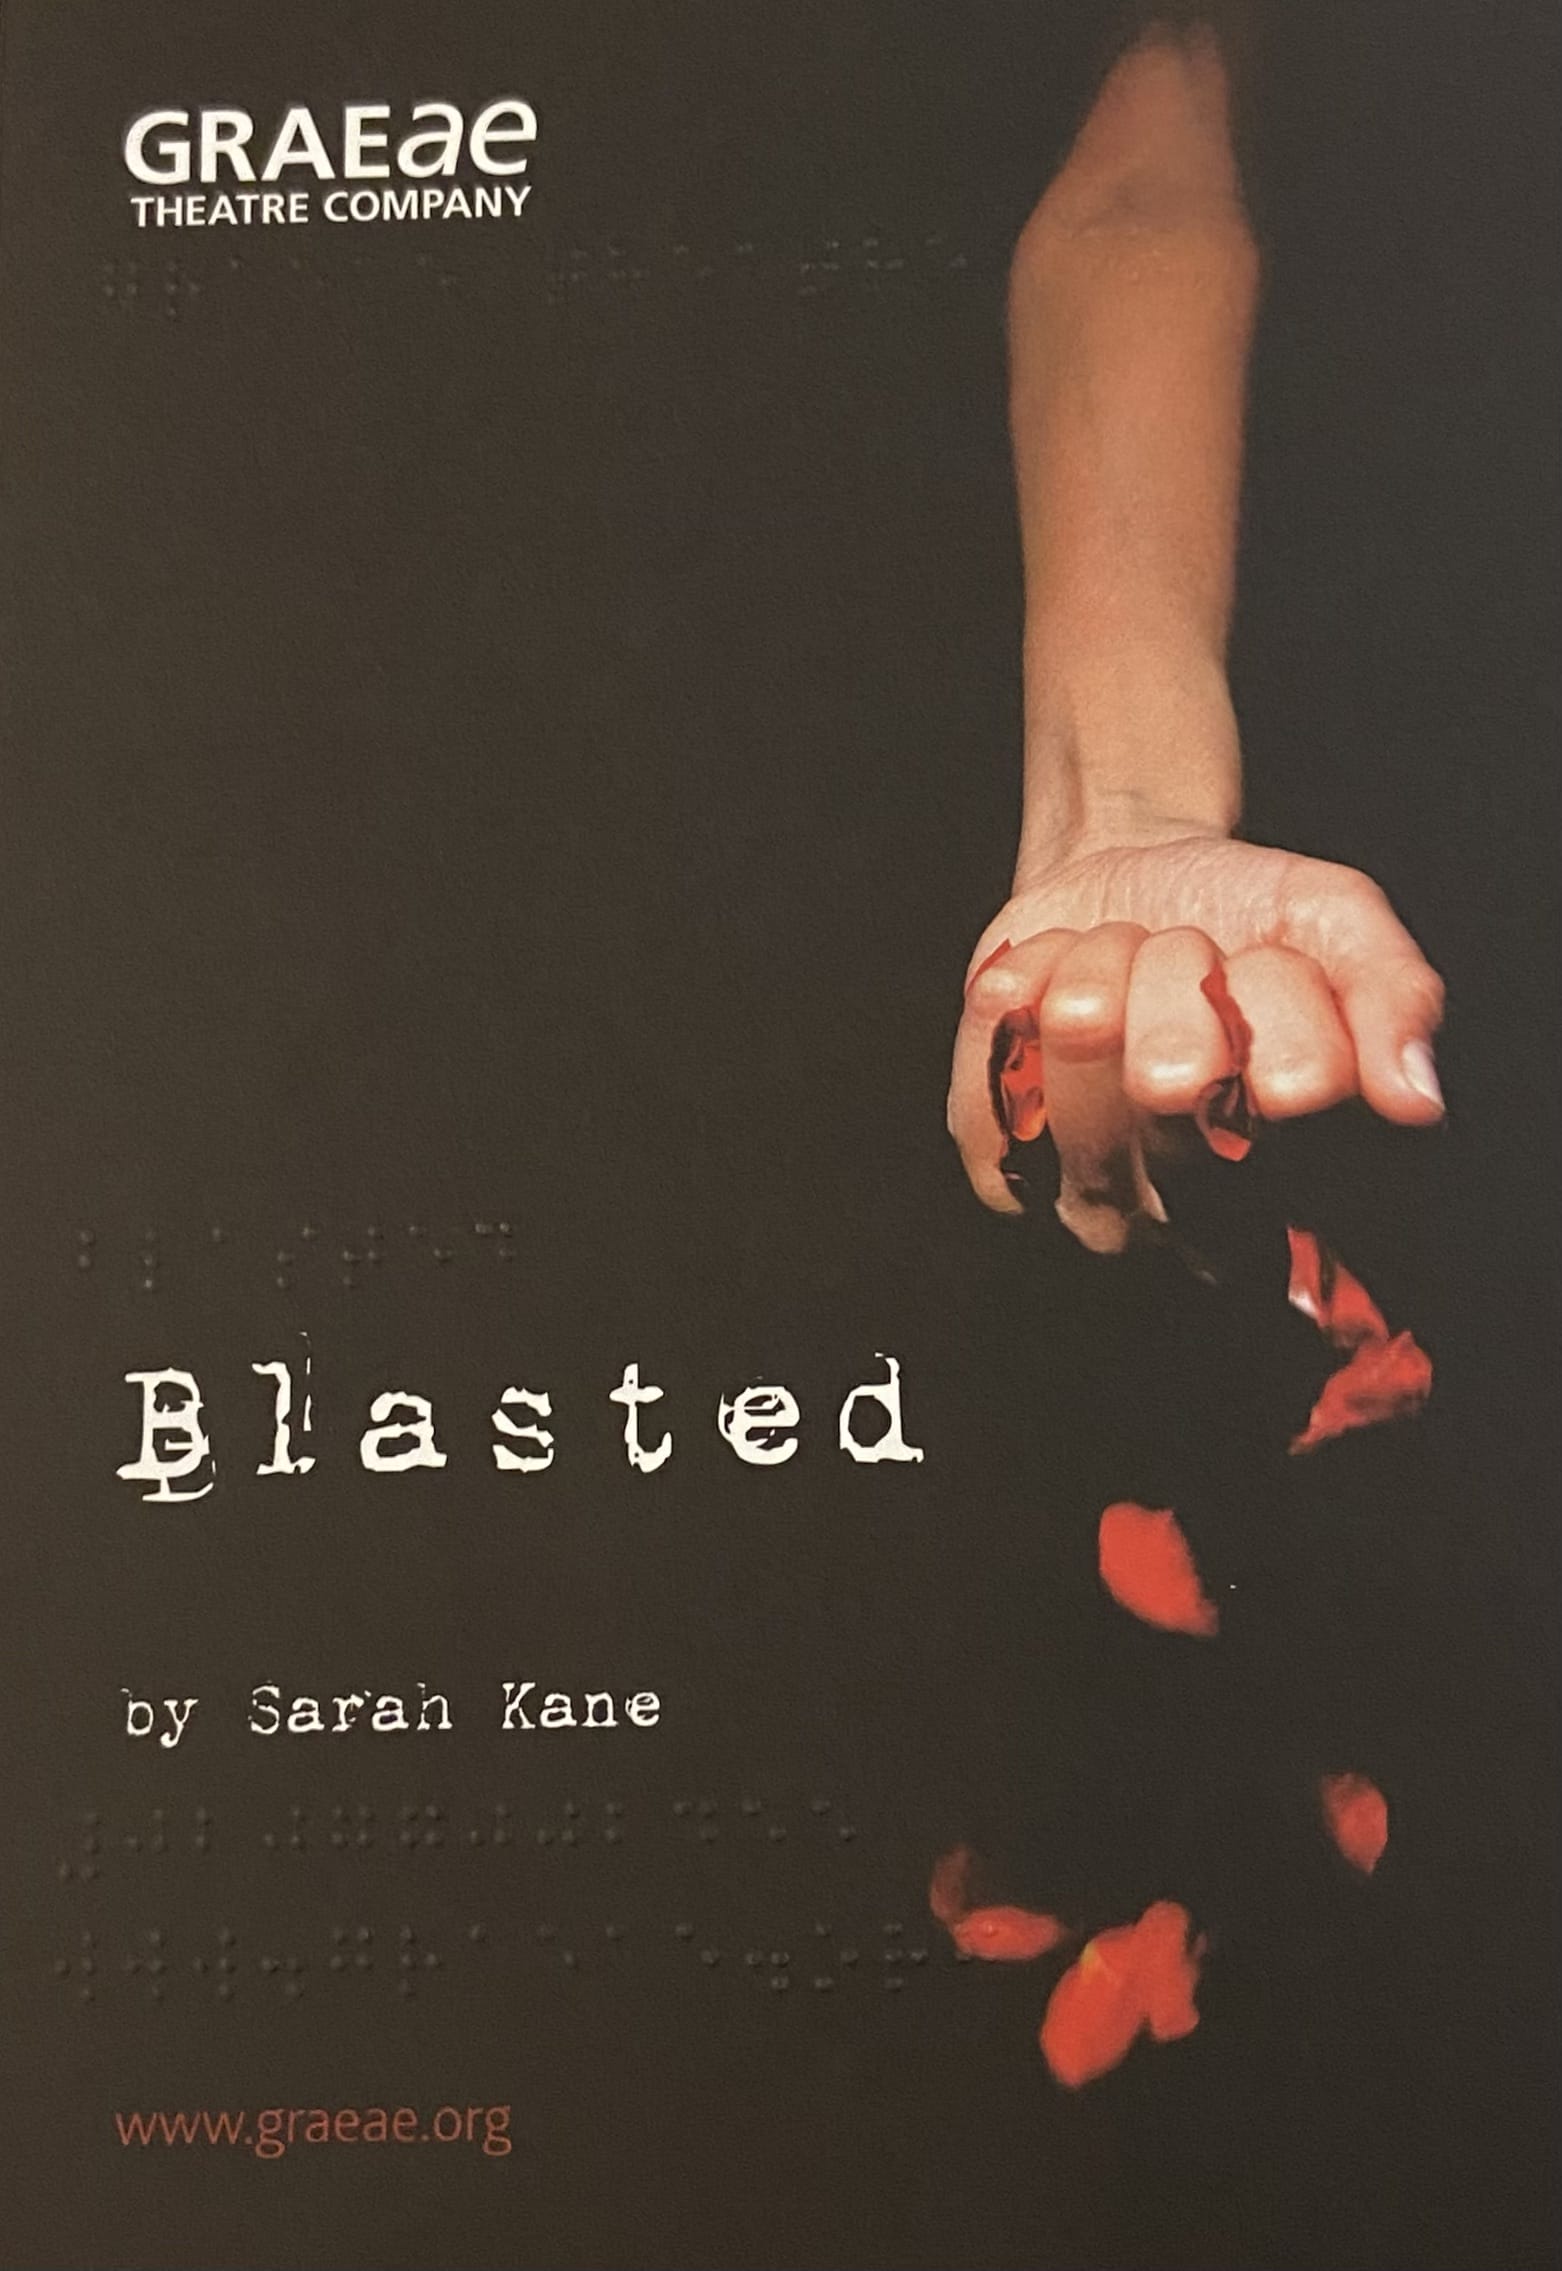 A poster for Graeae's production of 'Blasted' by Sarah Kane. The poster is black and title is written in a white type writer font. There is a hand clenched into a fist, with rose petals overflowing from its grasp.